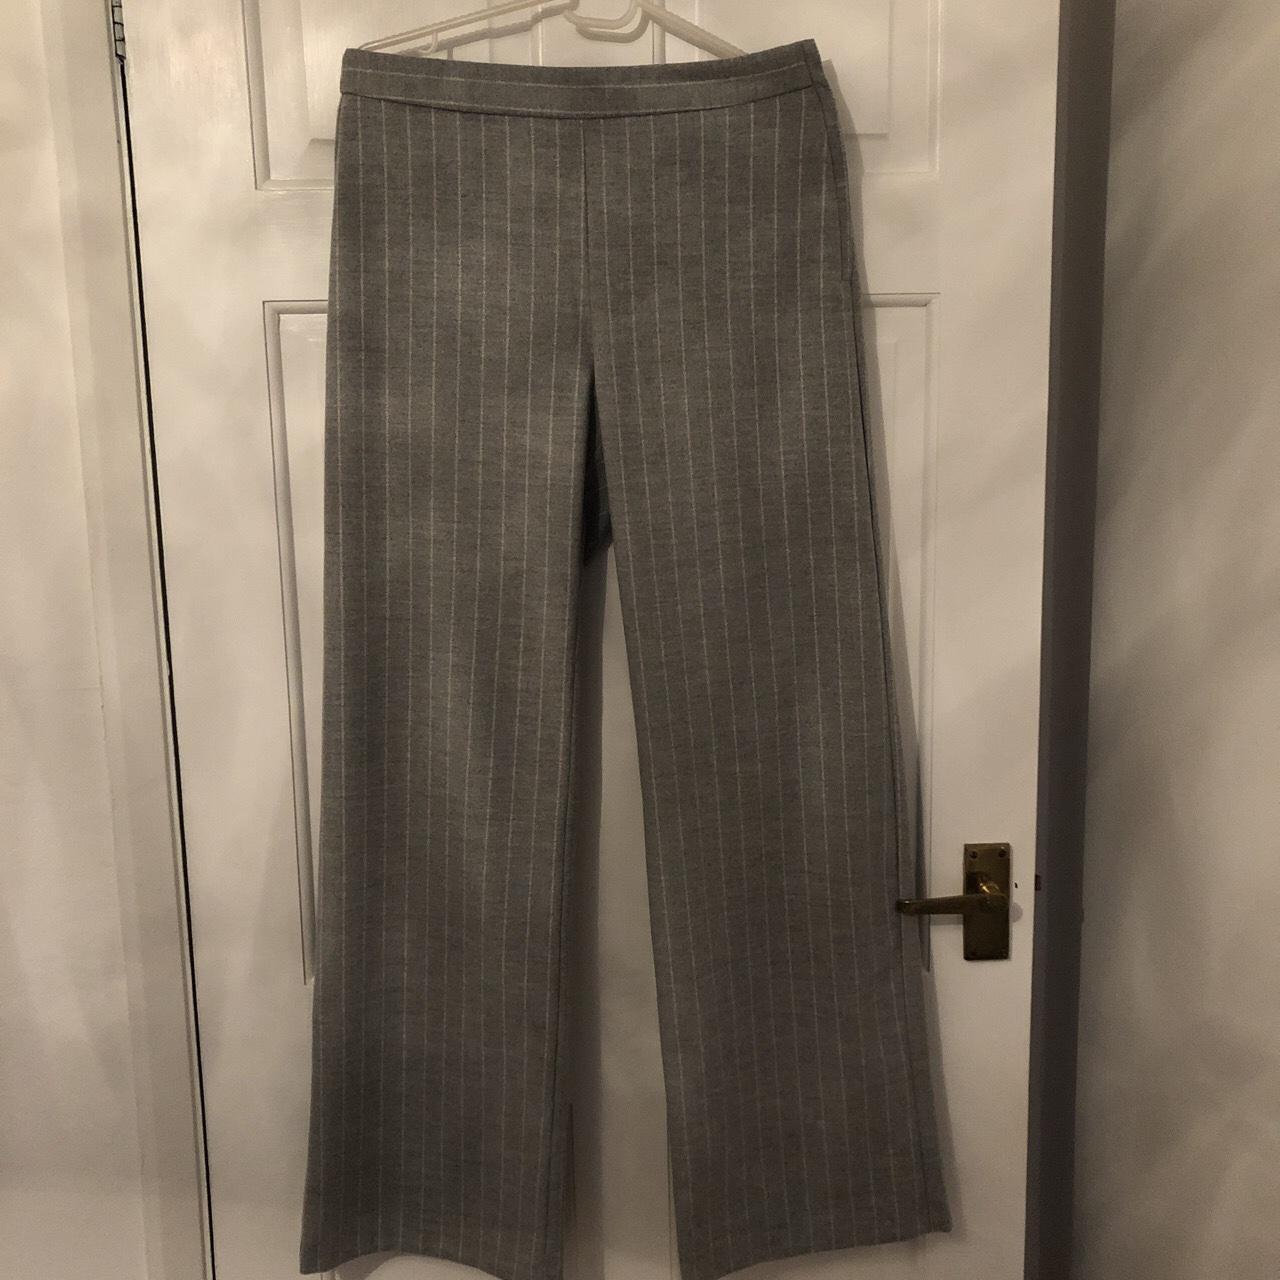 River island grey wide leg trousers with side... - Depop